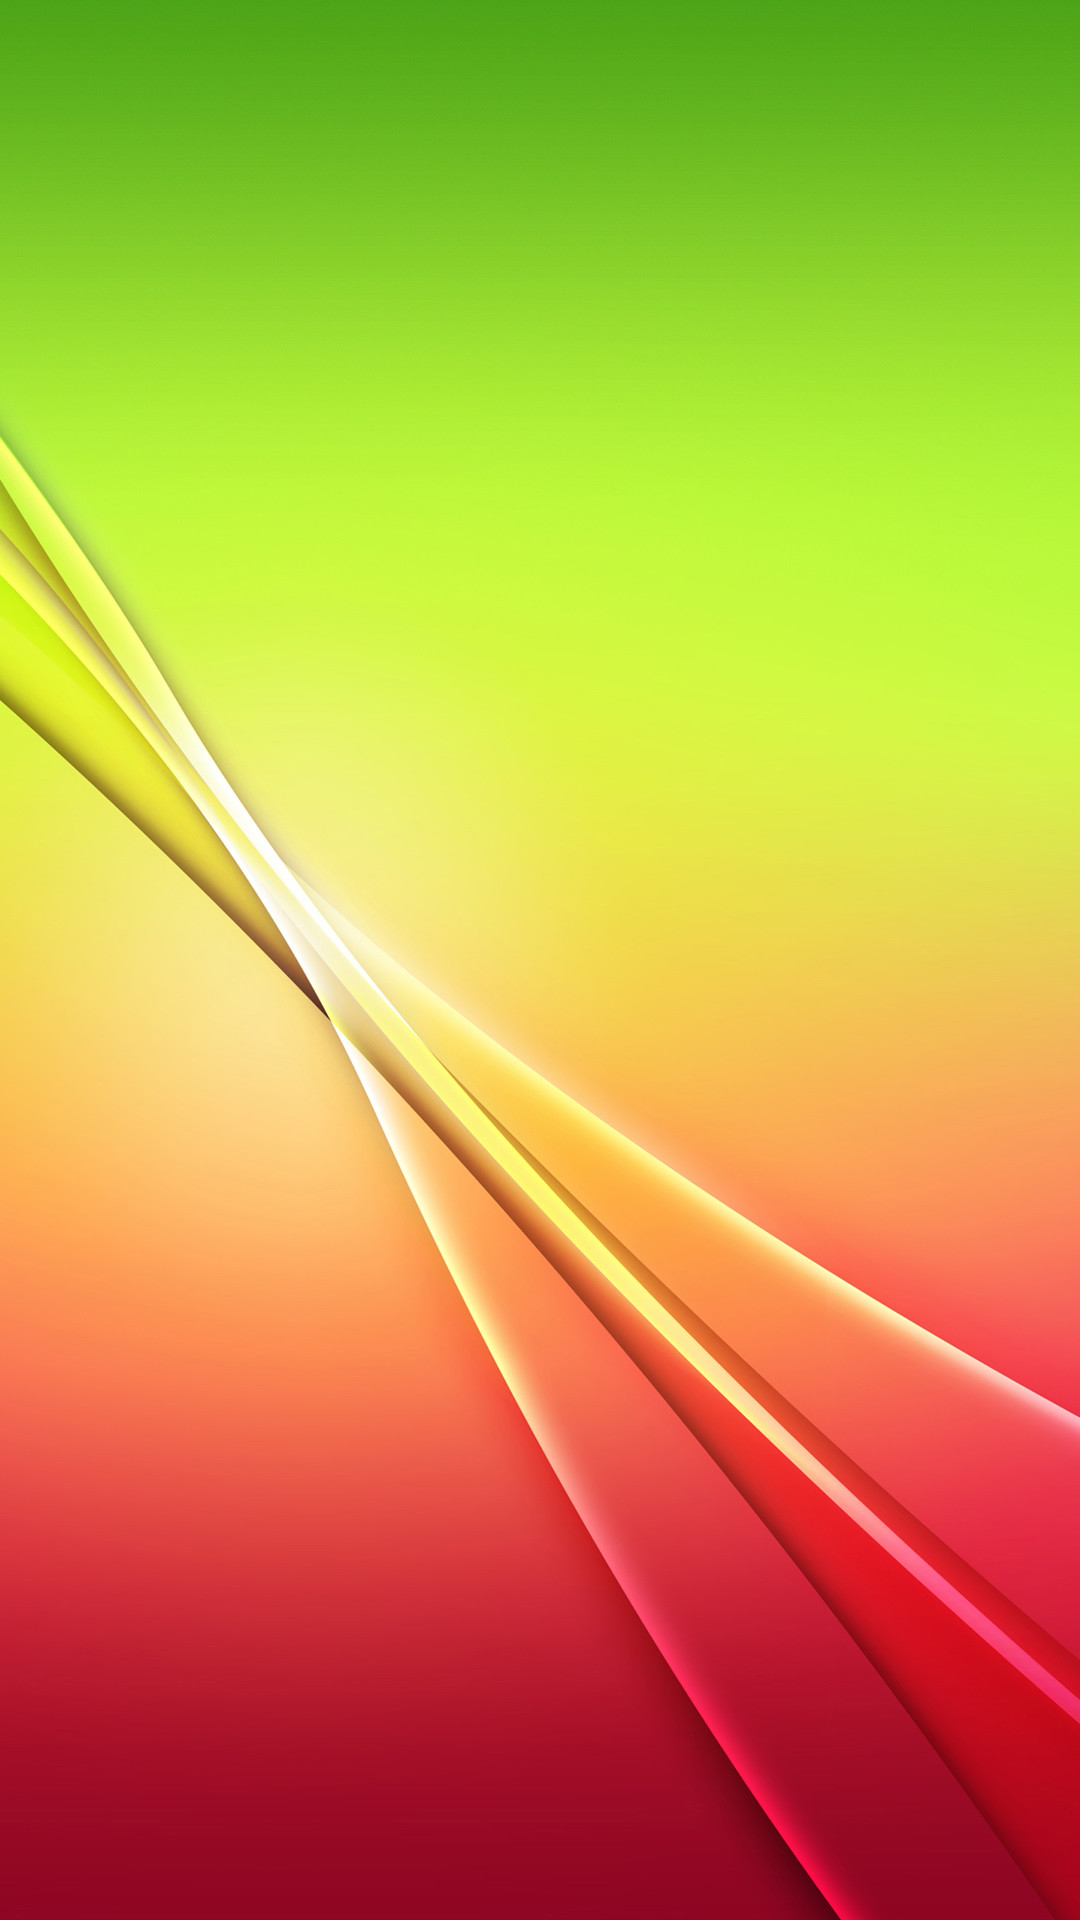 1080x1920 Bright Wave #iPhone #7 #wallpaper